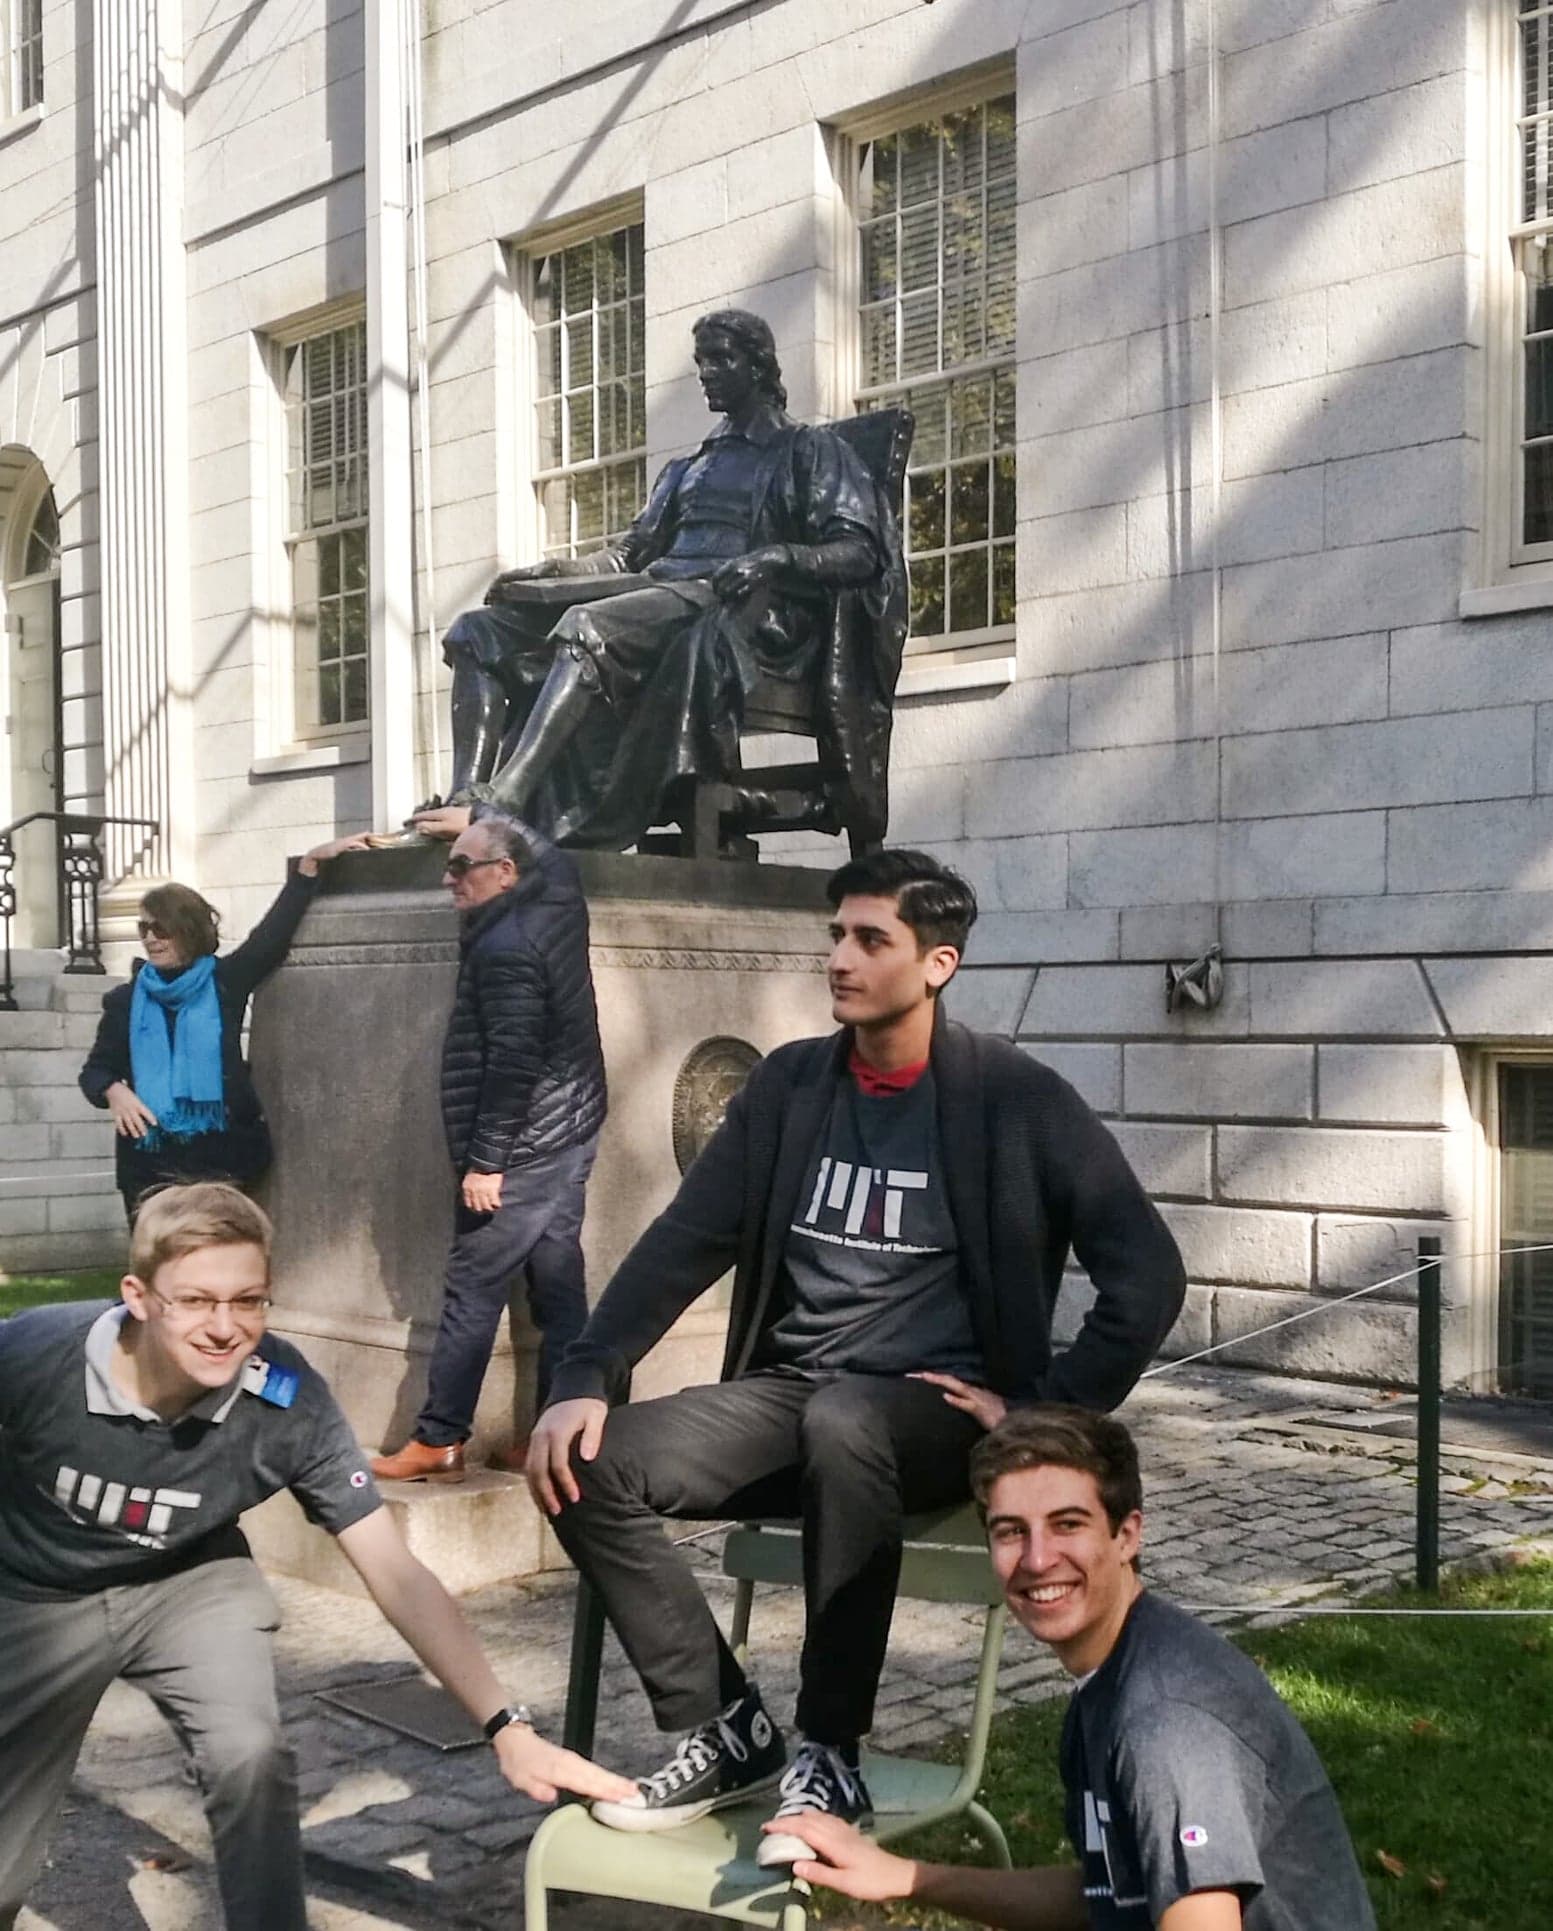 My friends and I at the statue of John Harvard, subverting the usual tradition